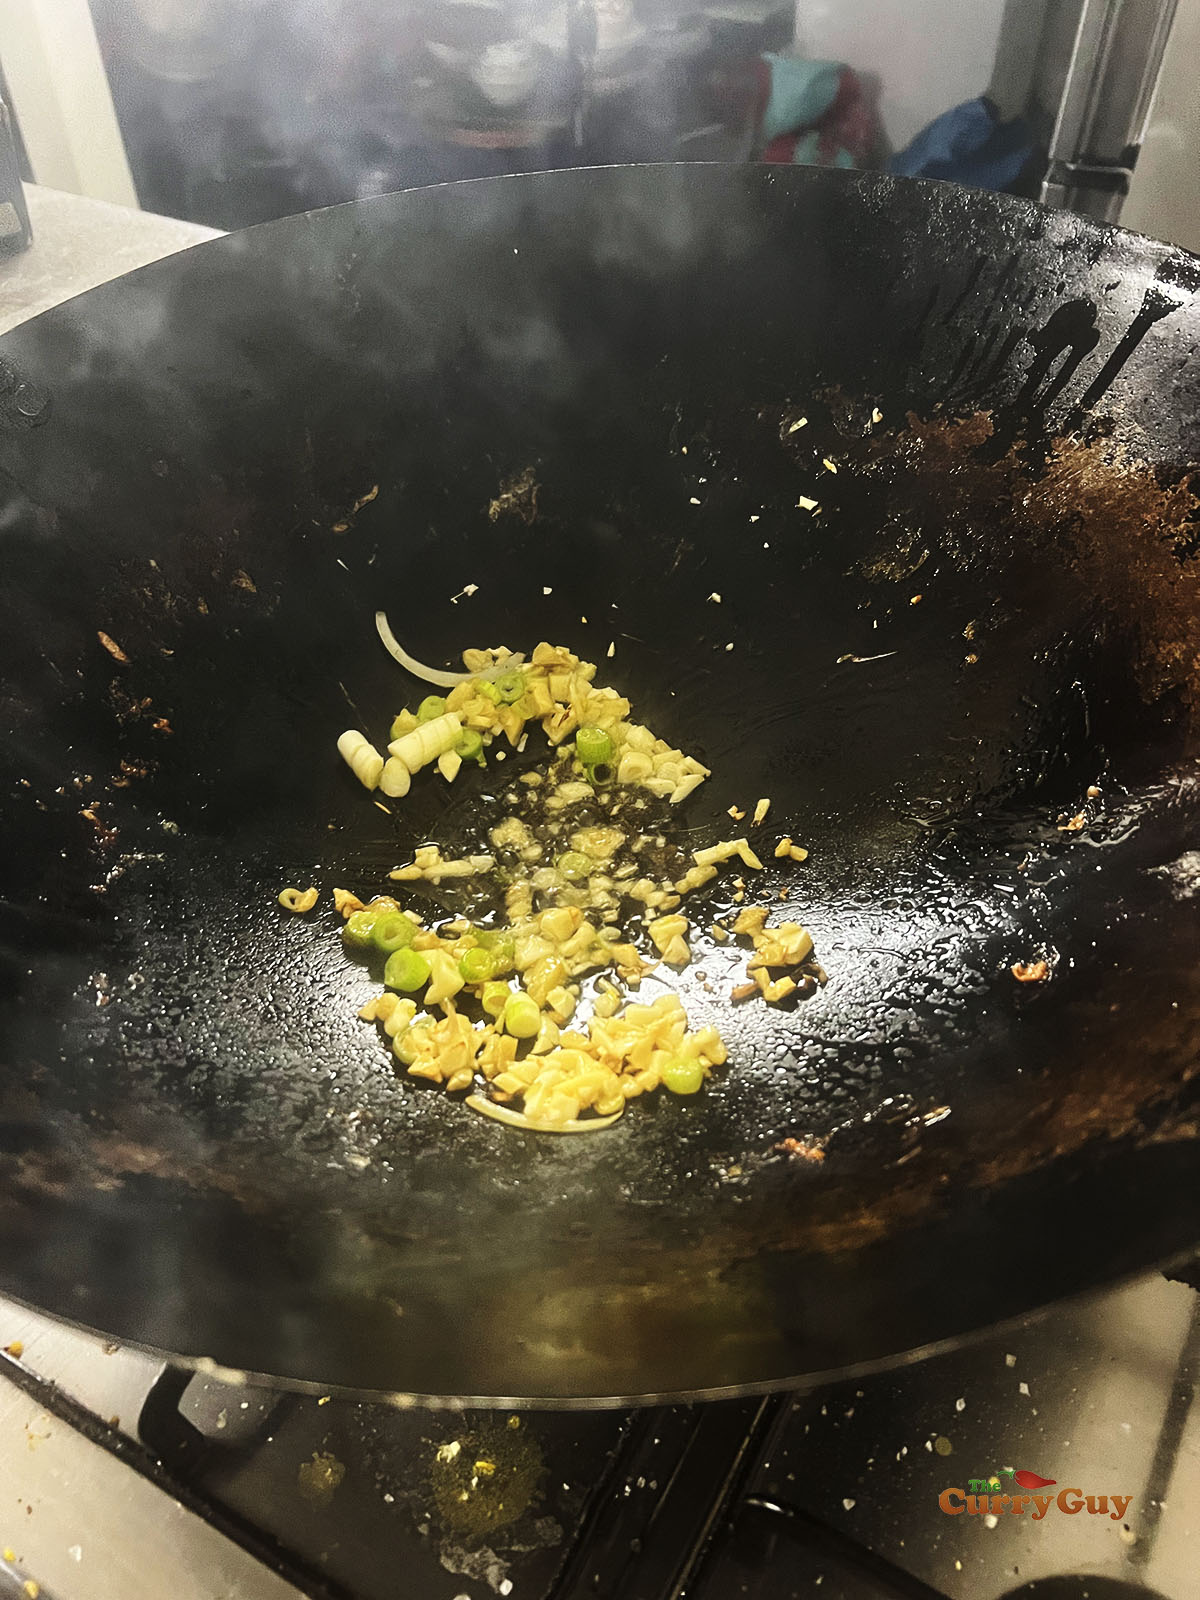 Frying the aromatic ingredients, ginger, garlic and spring onions (scallions)